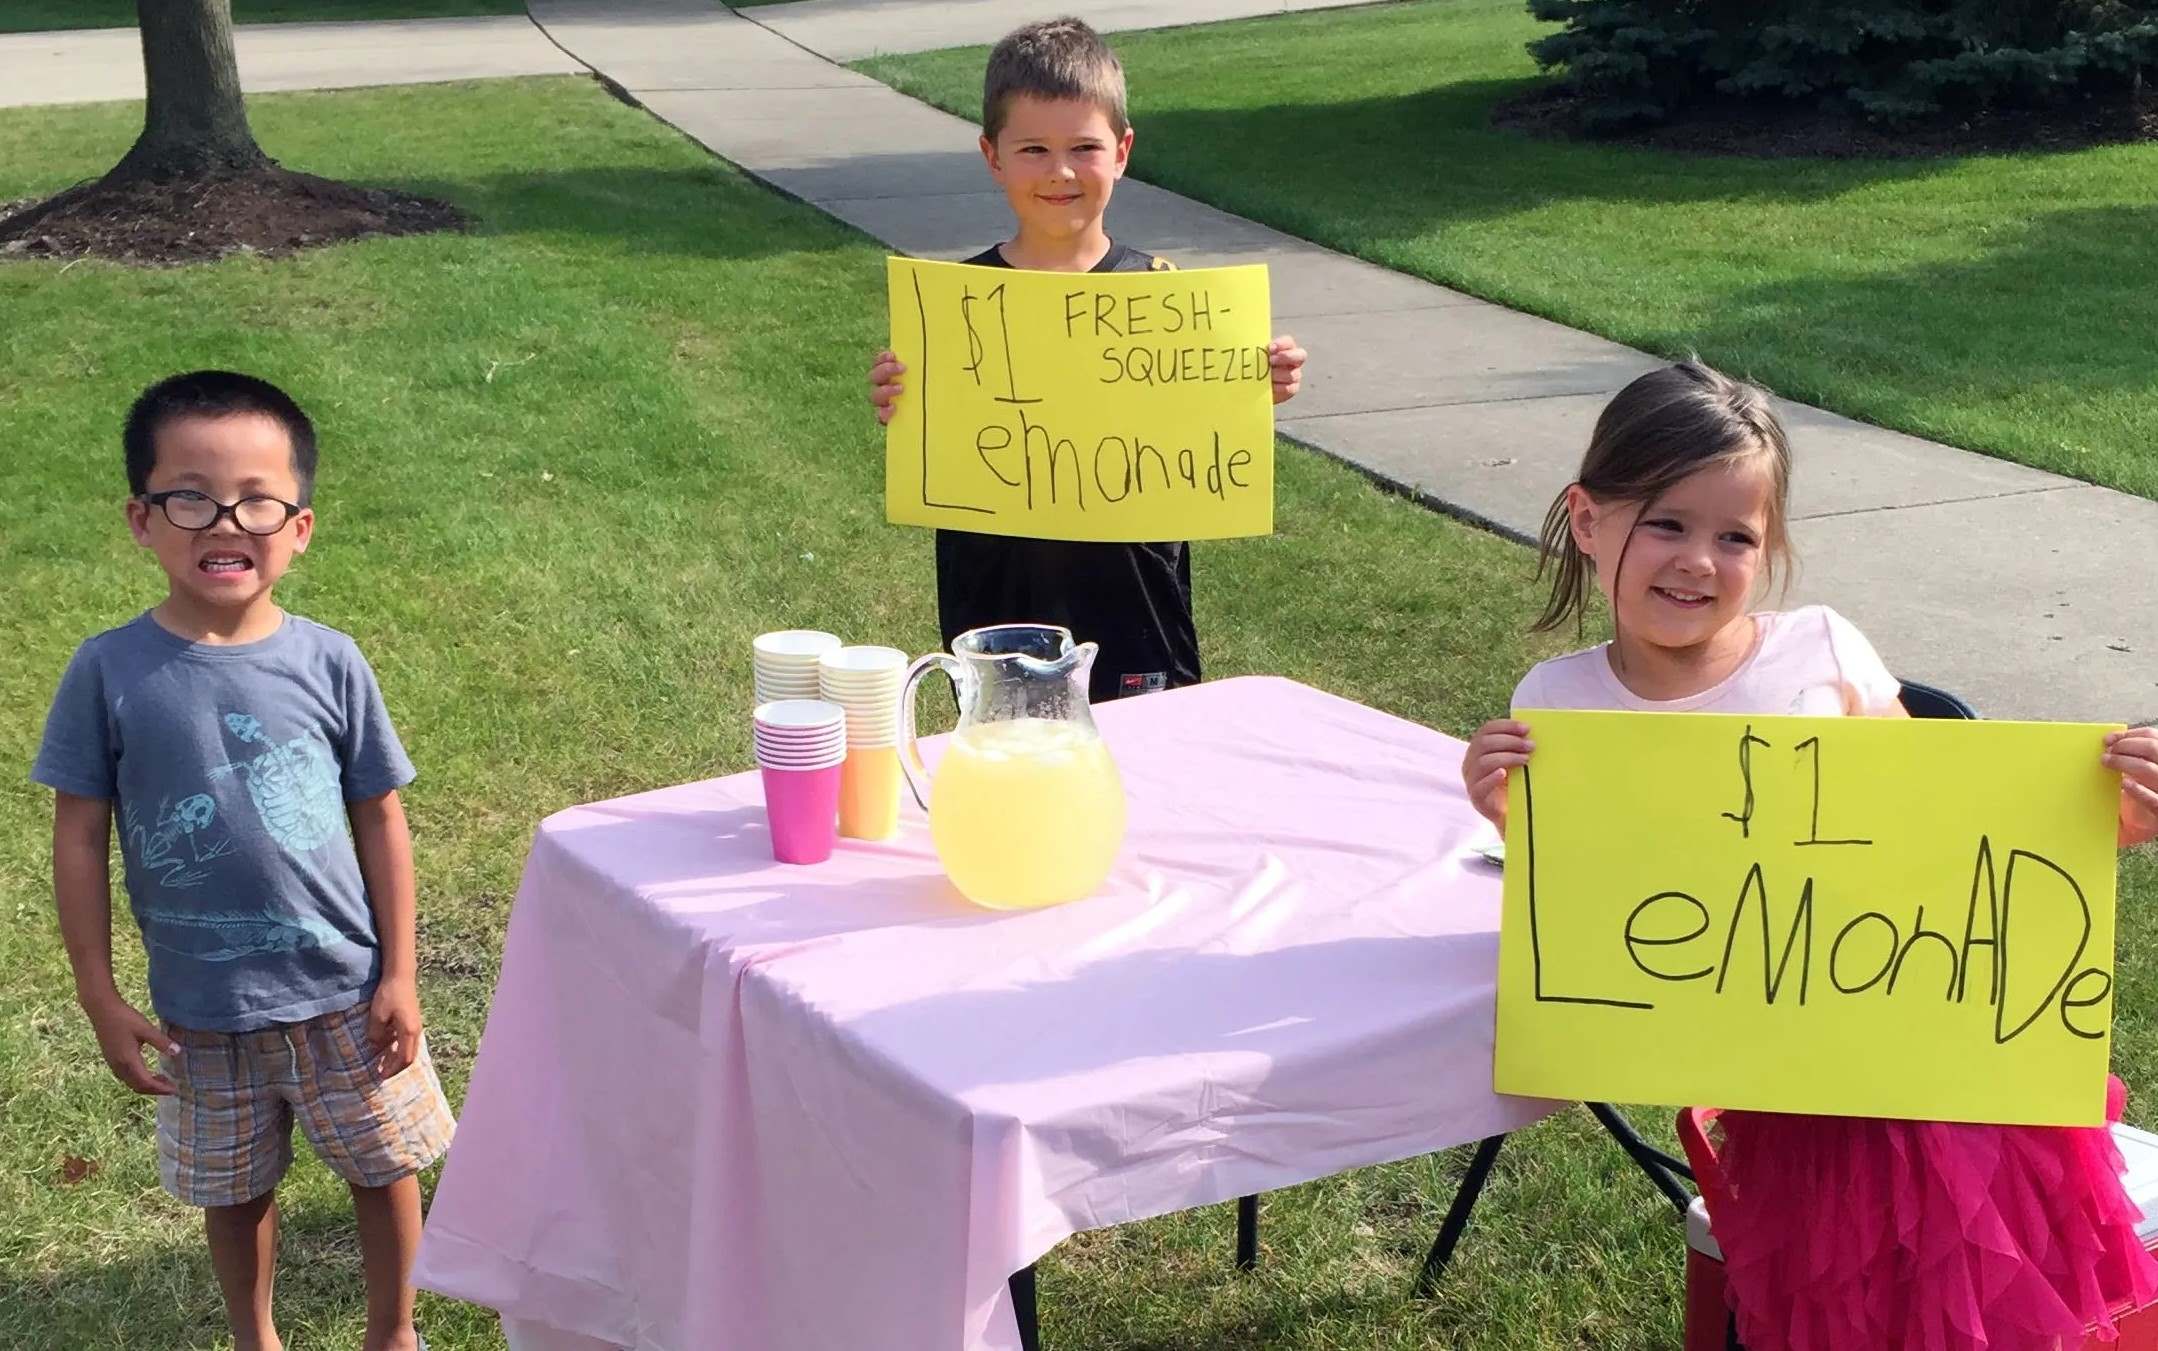 15-astonishing-facts-about-lemonade-stand